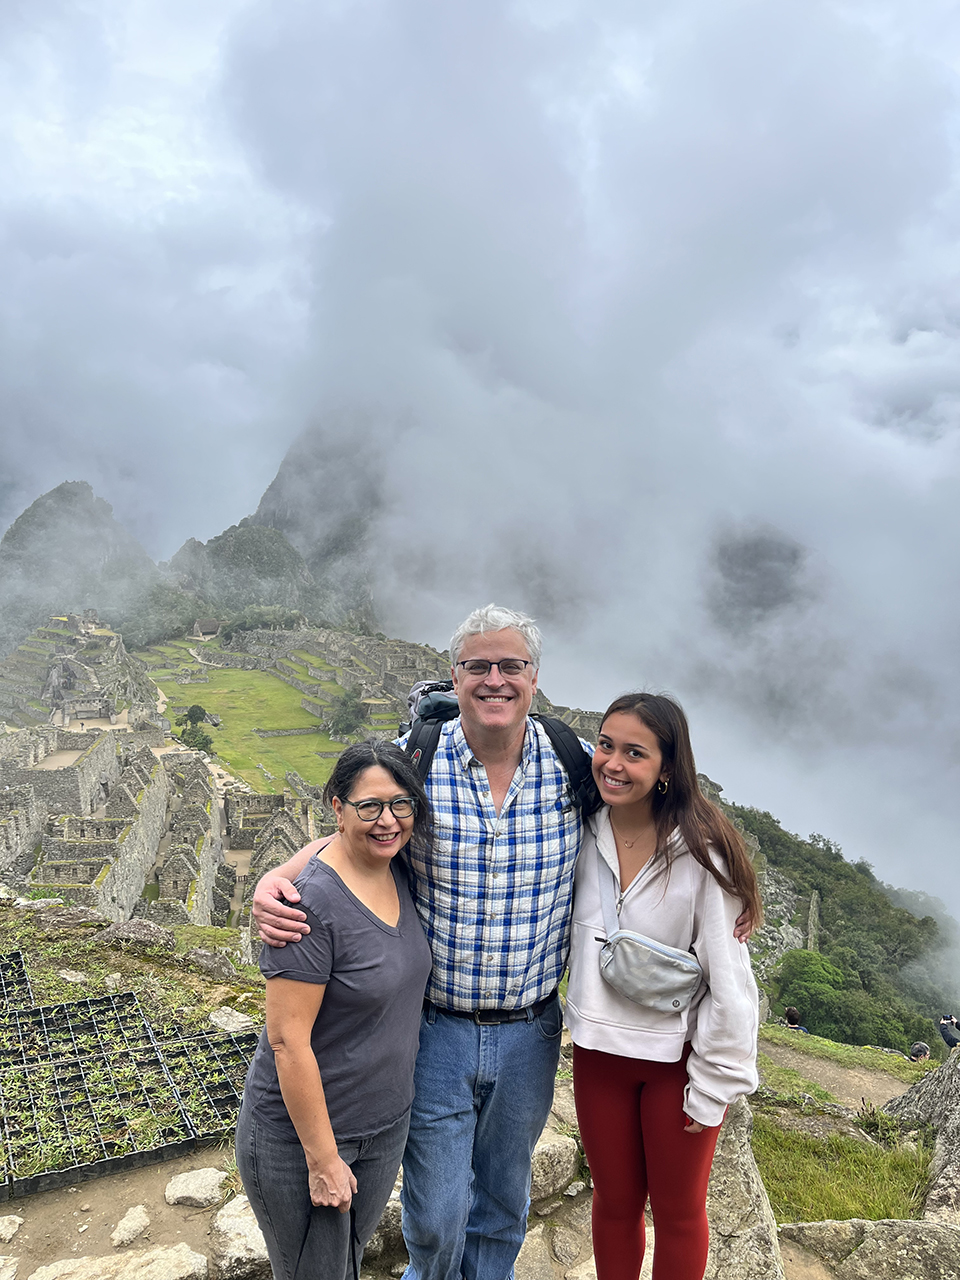 A family of three pose together against a misty mountain background.